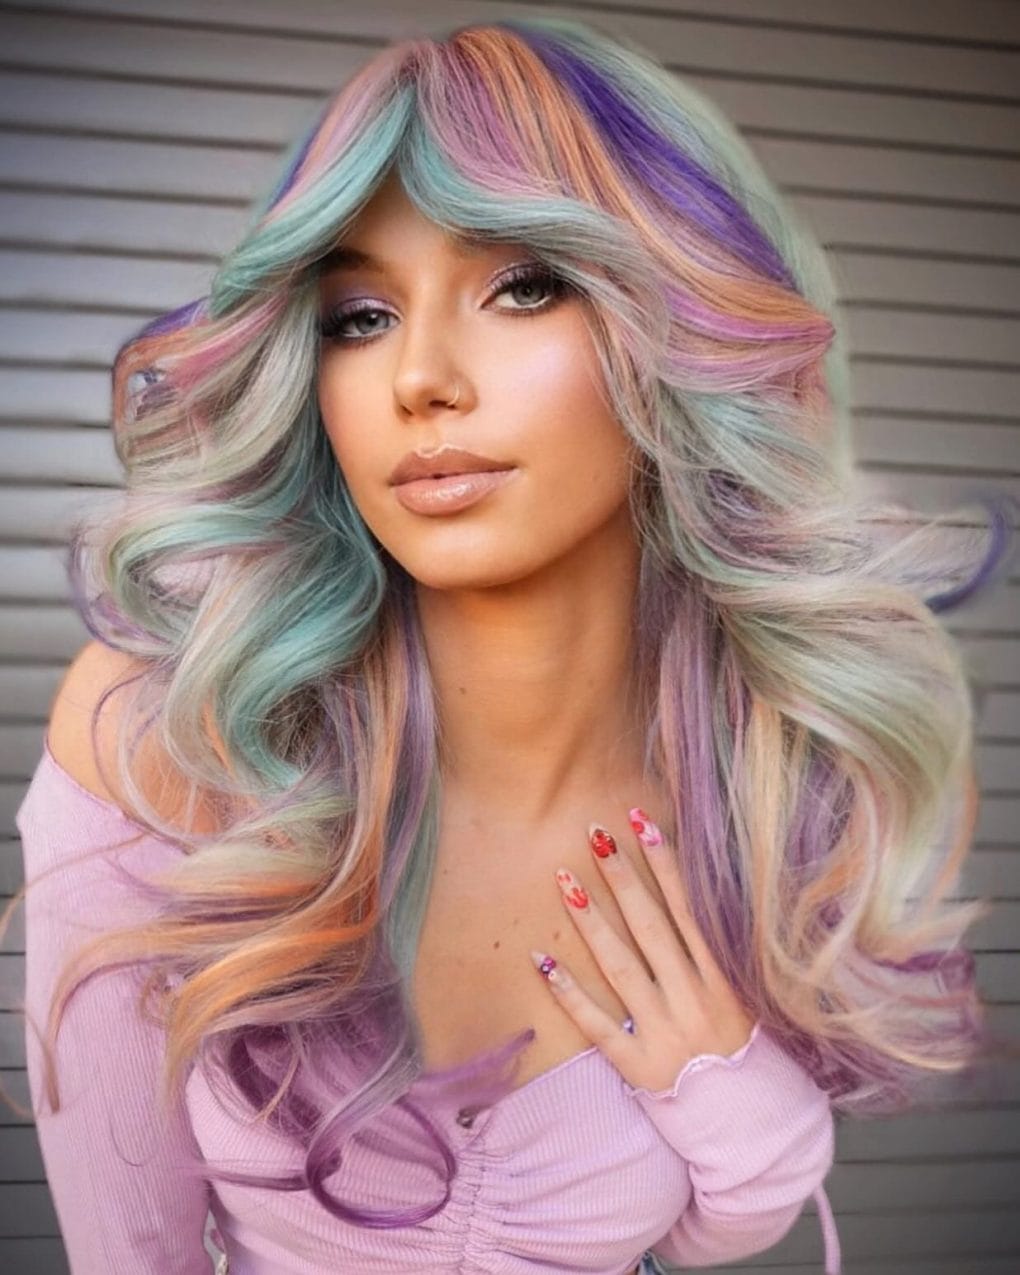 Pastel sunset-inspired waves with playful side bangs